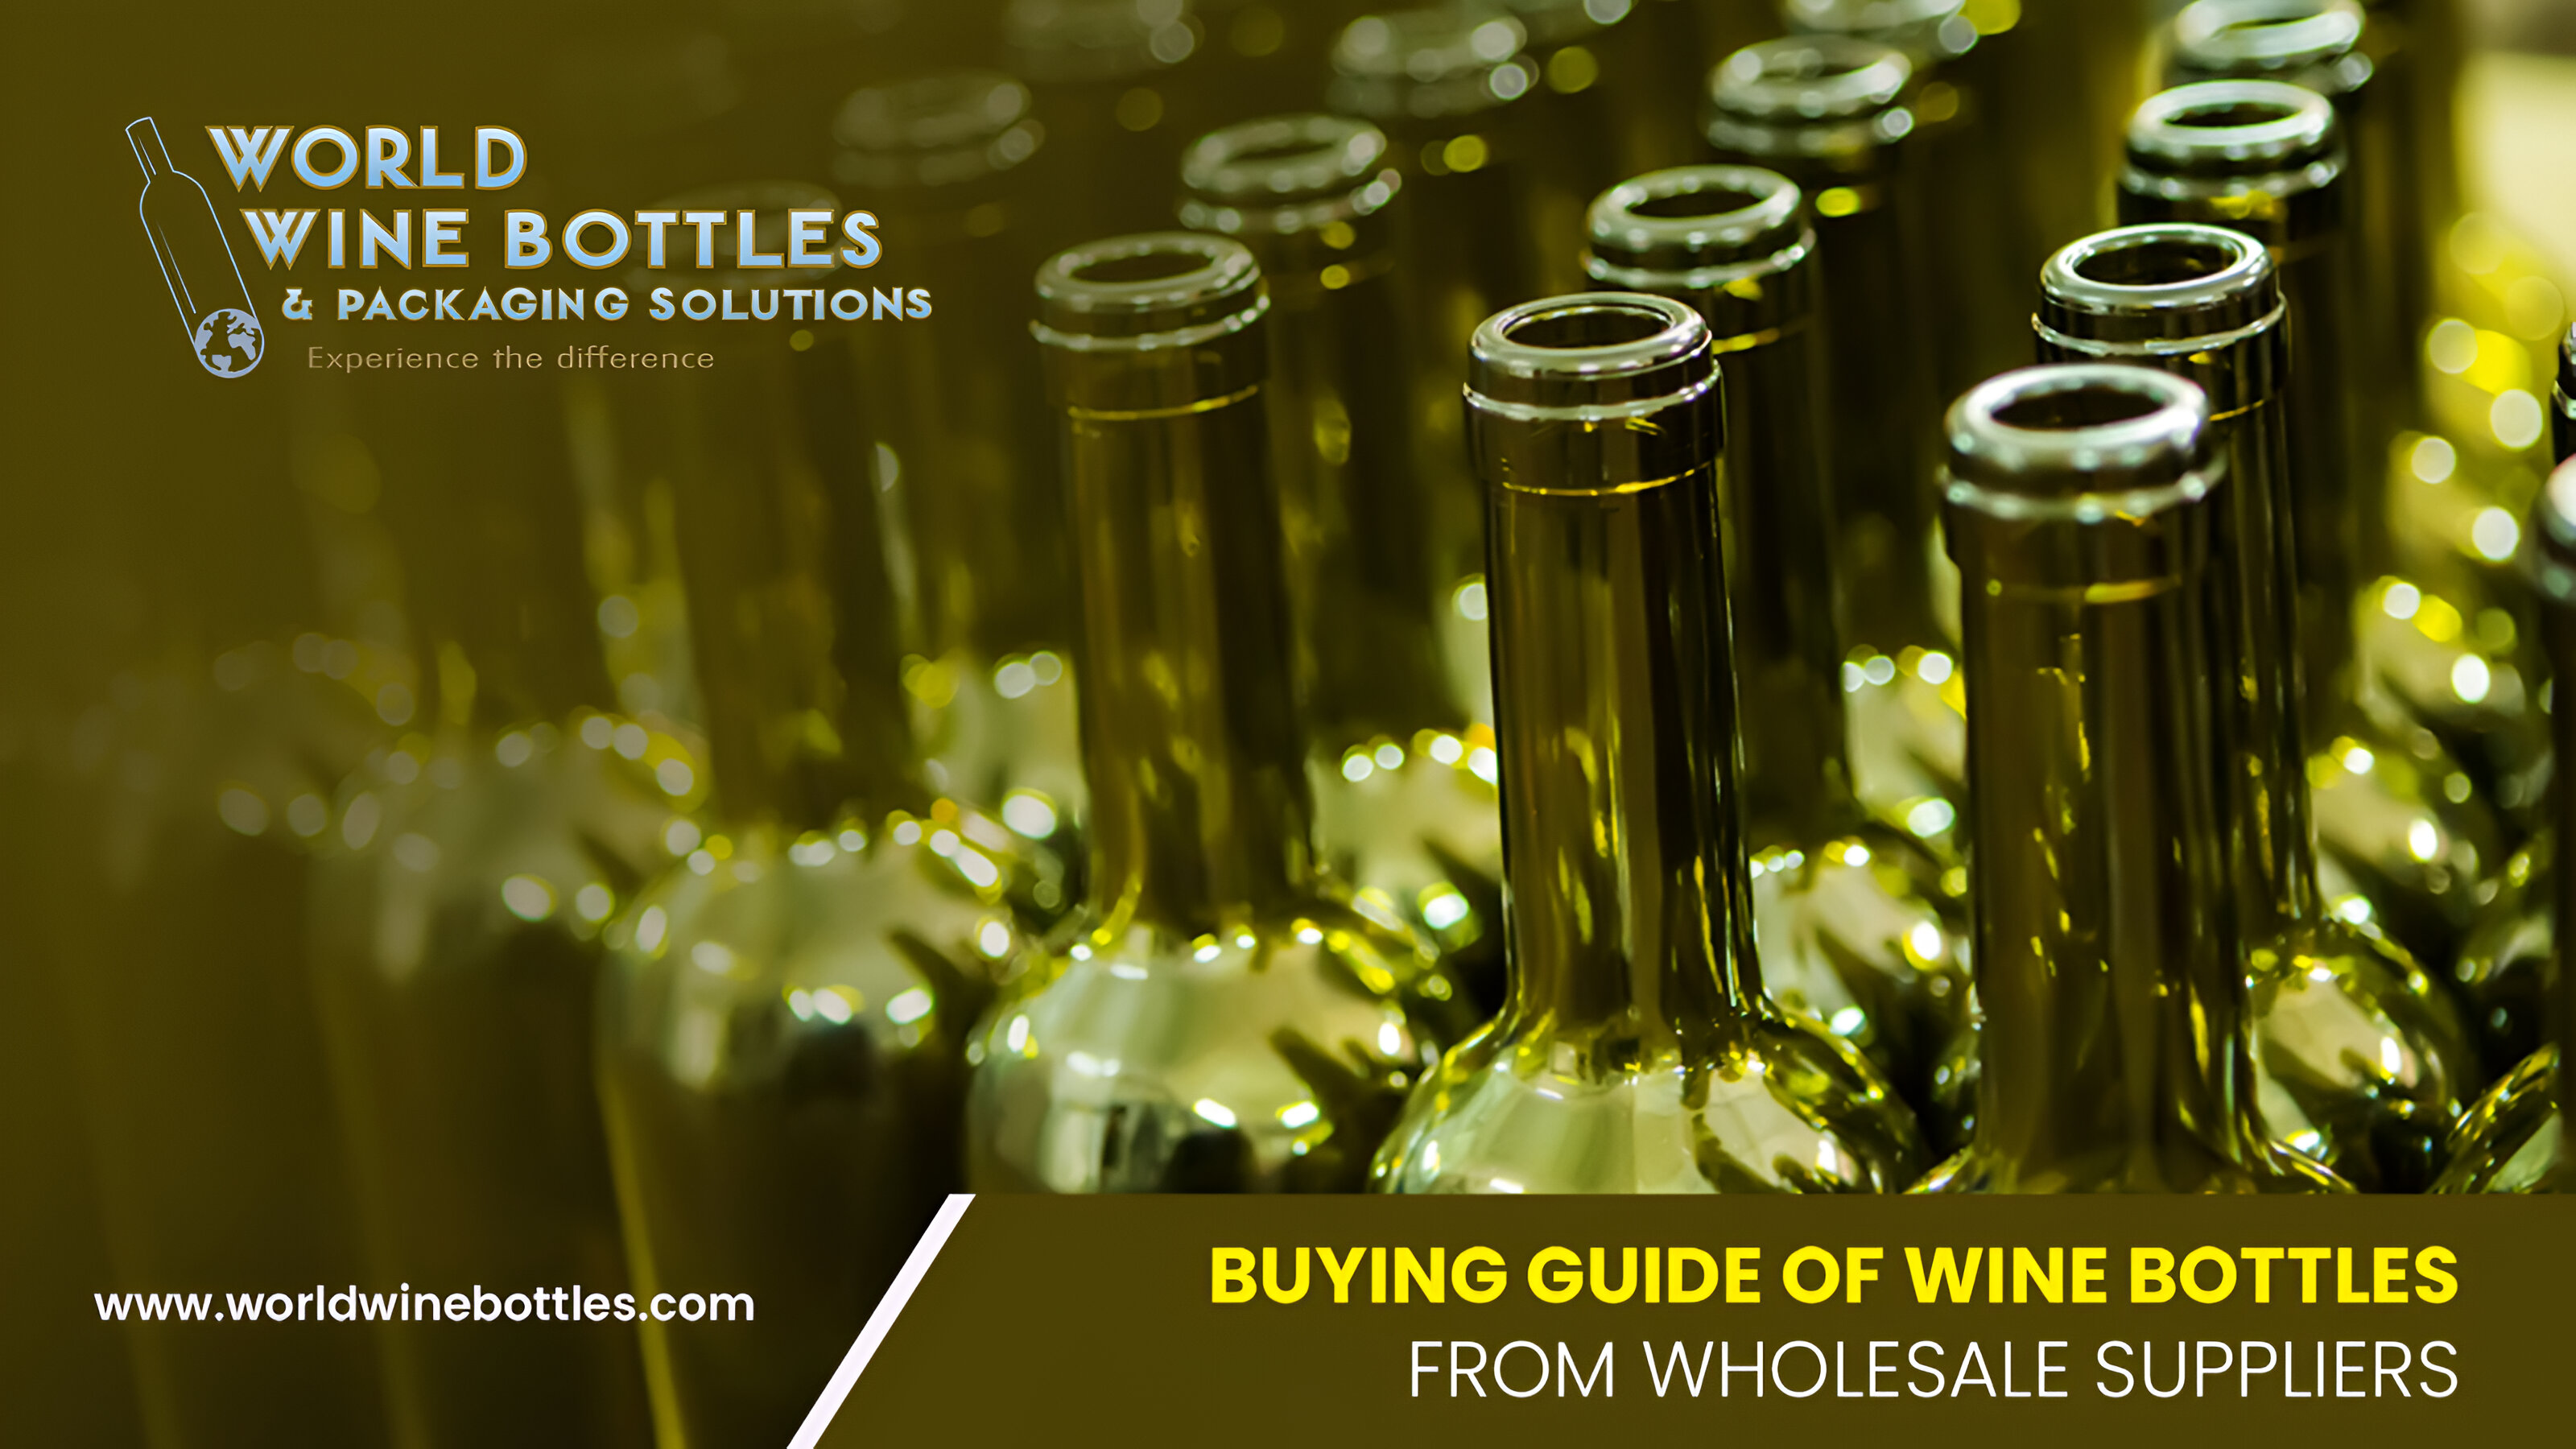 Buying Guide of Wine Bottles from Wholesale Suppliers